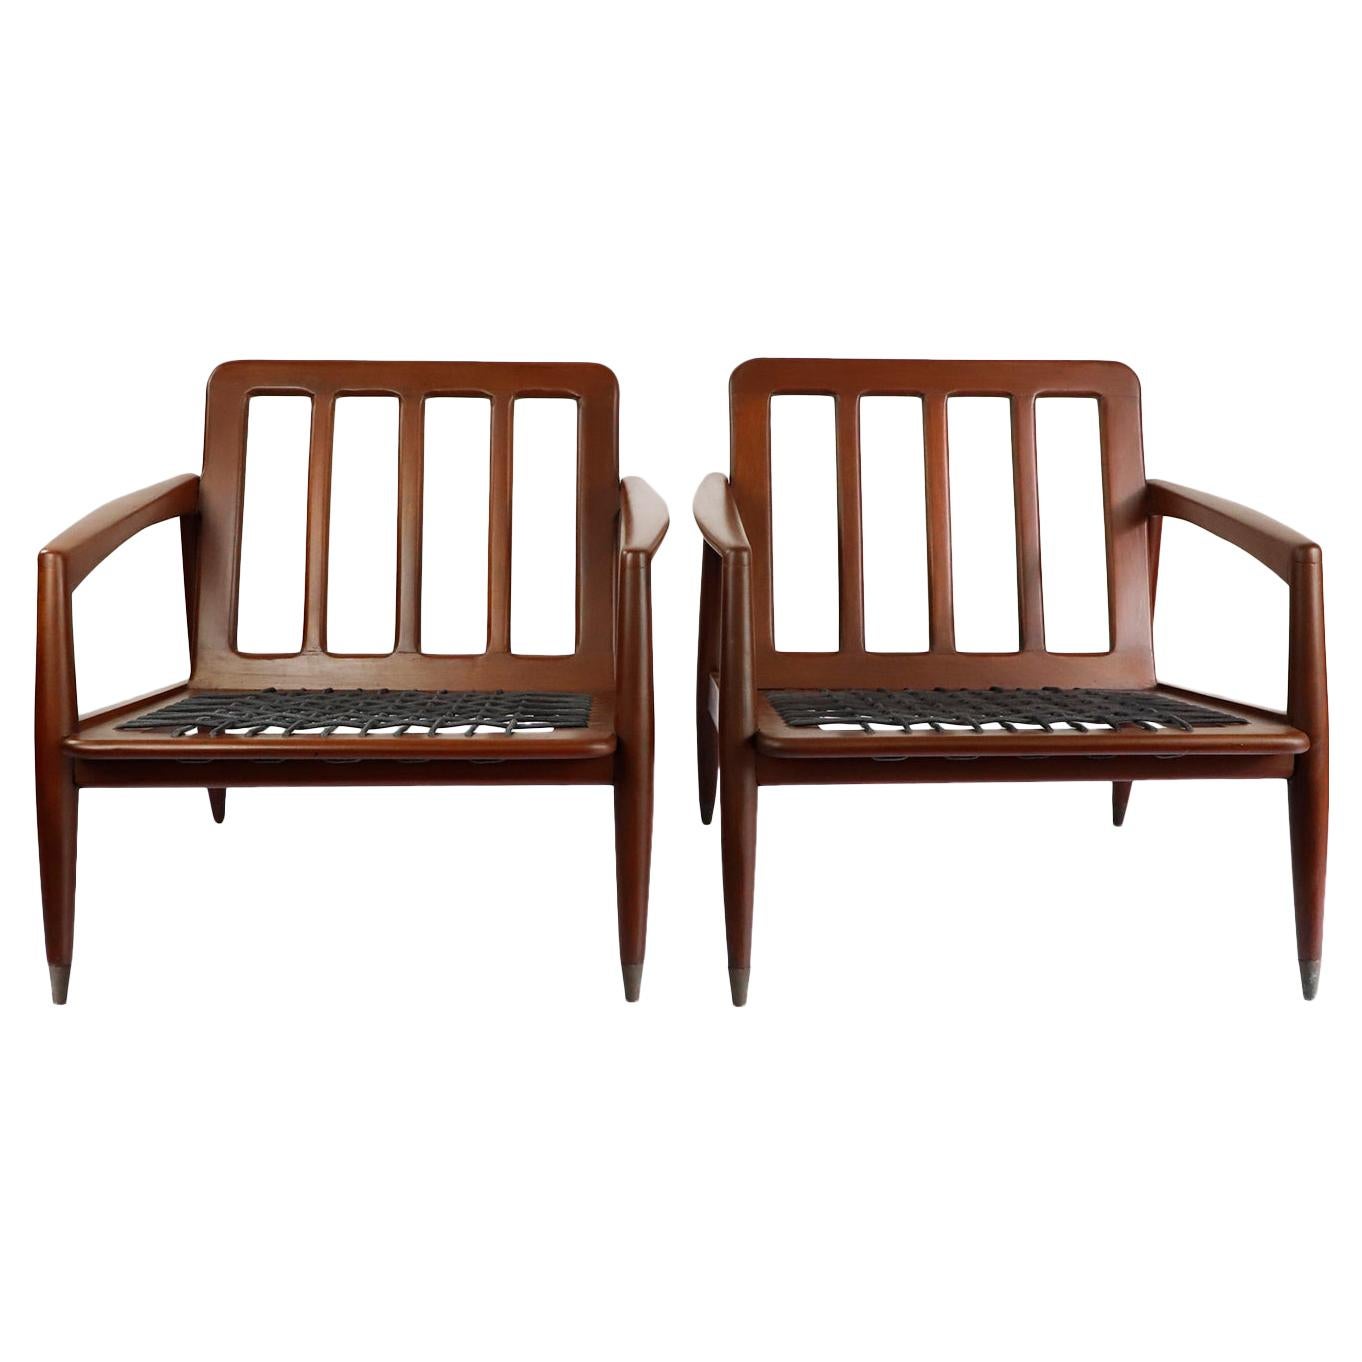 Pair of Armchairs Attributed to Charles Allen